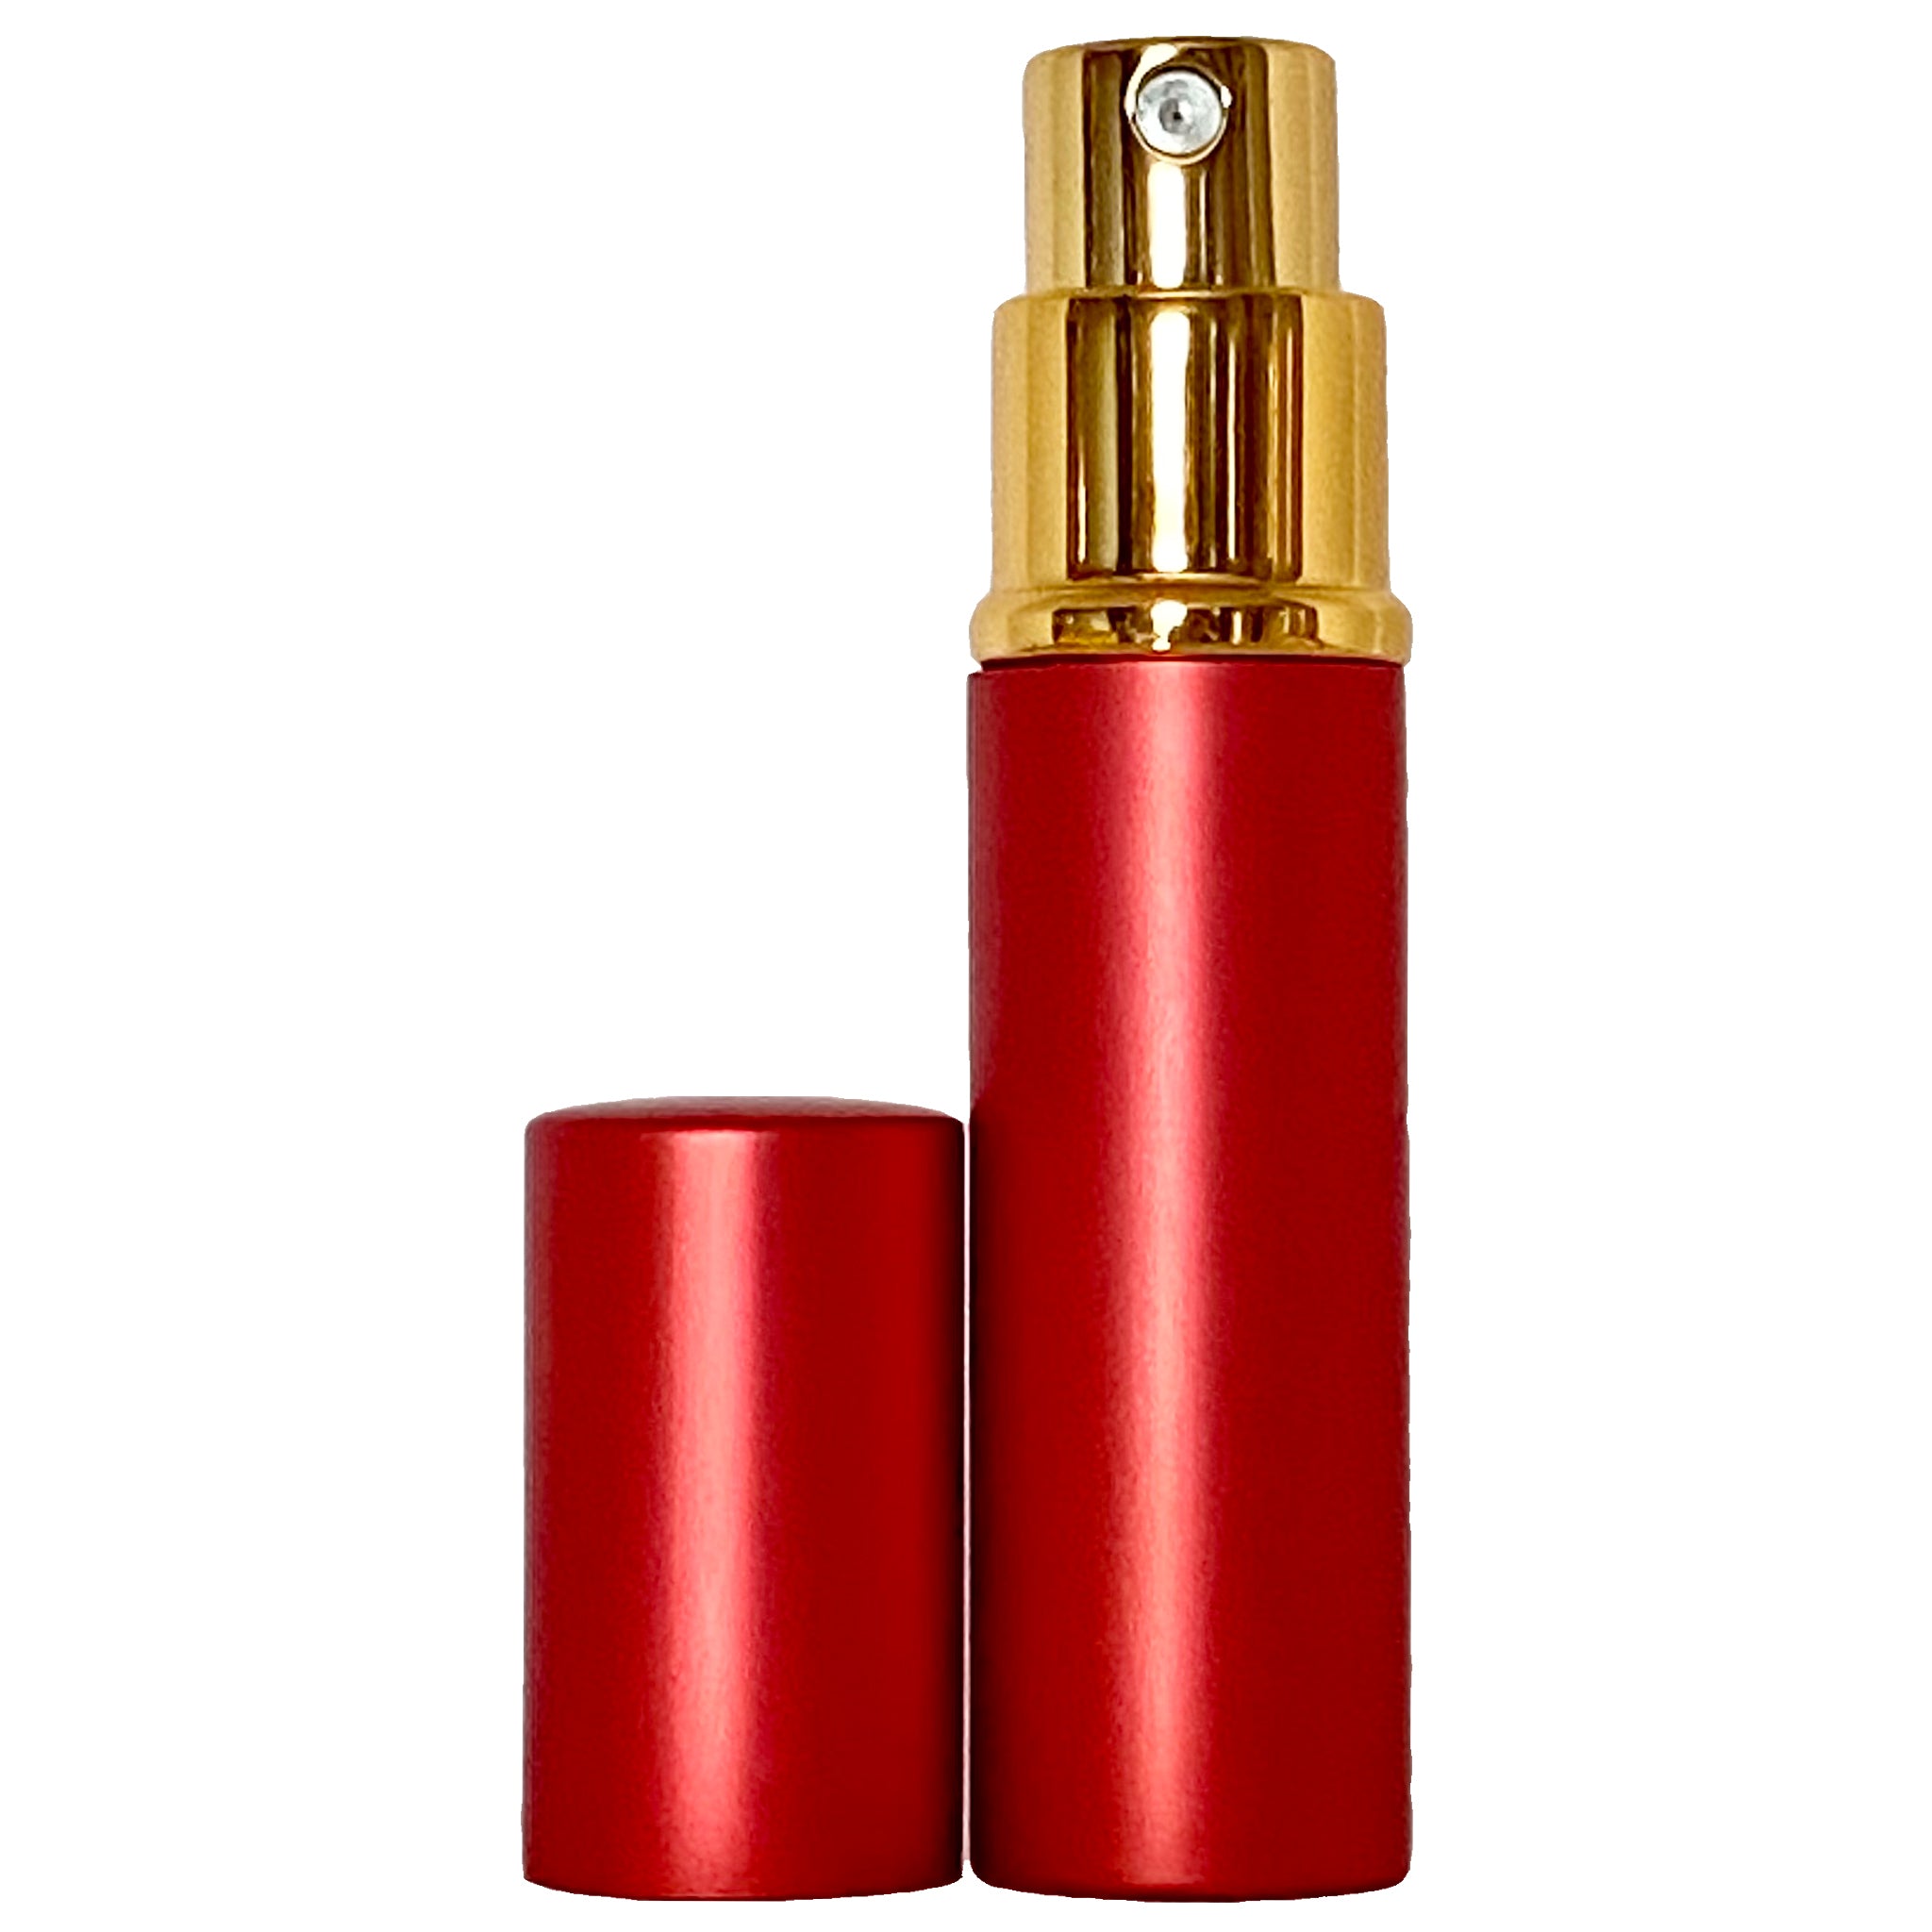 6ml 0.2oz Red Perfume Glass Spray Deluxe Bottles Gold Atomizers